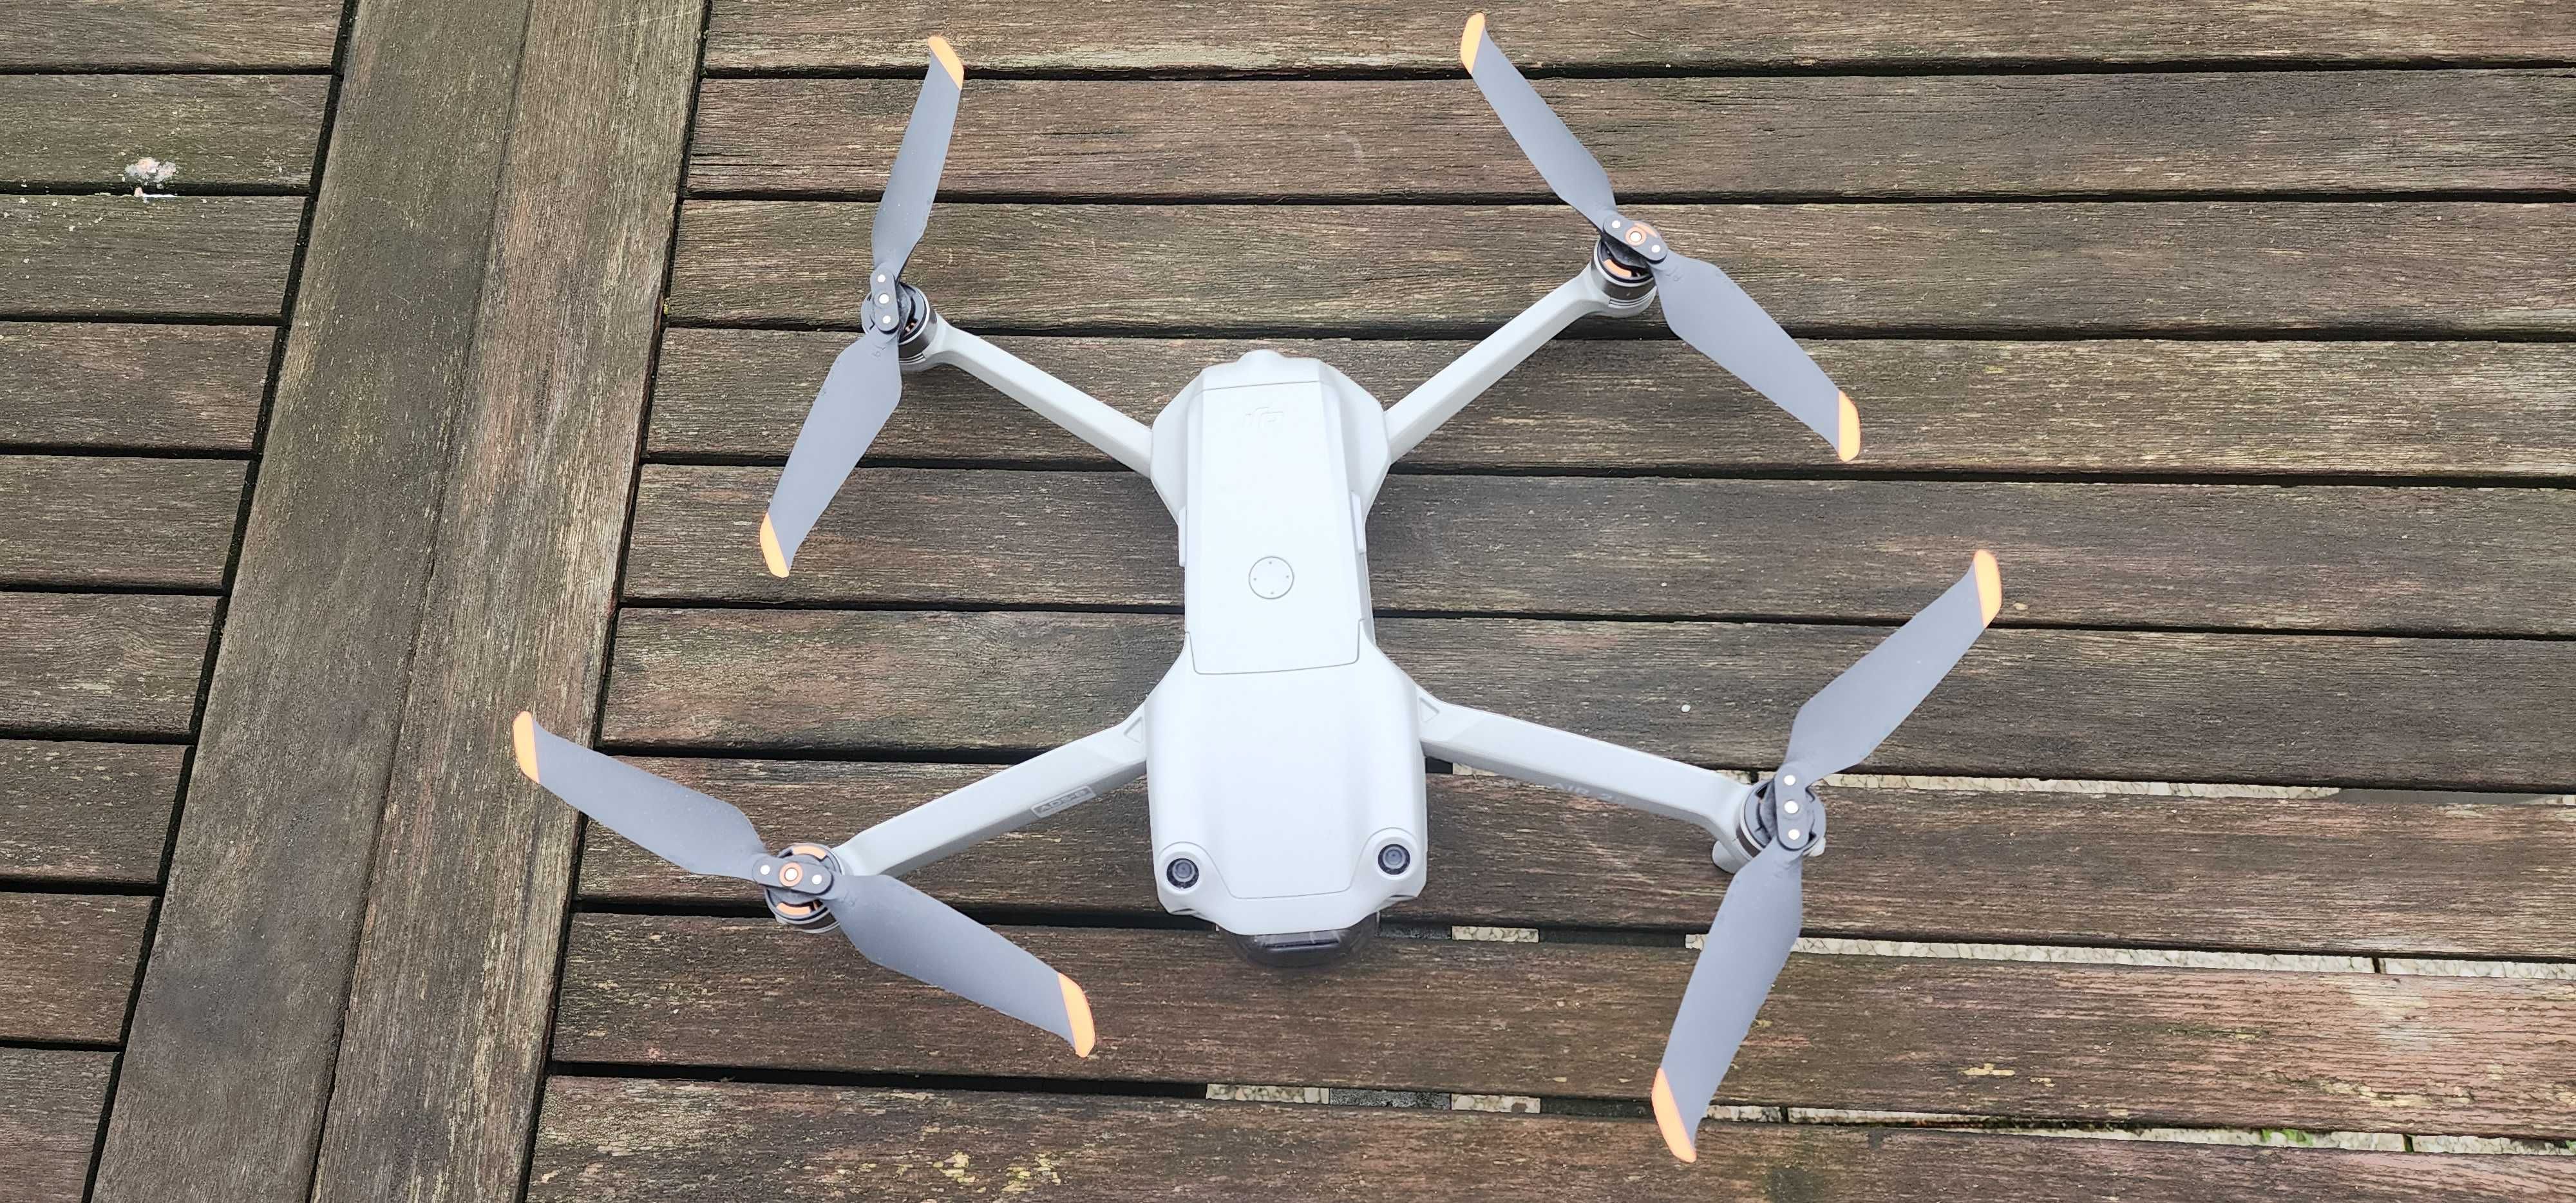 Kwadrokopter DJI AIR 2s Fly More Combo